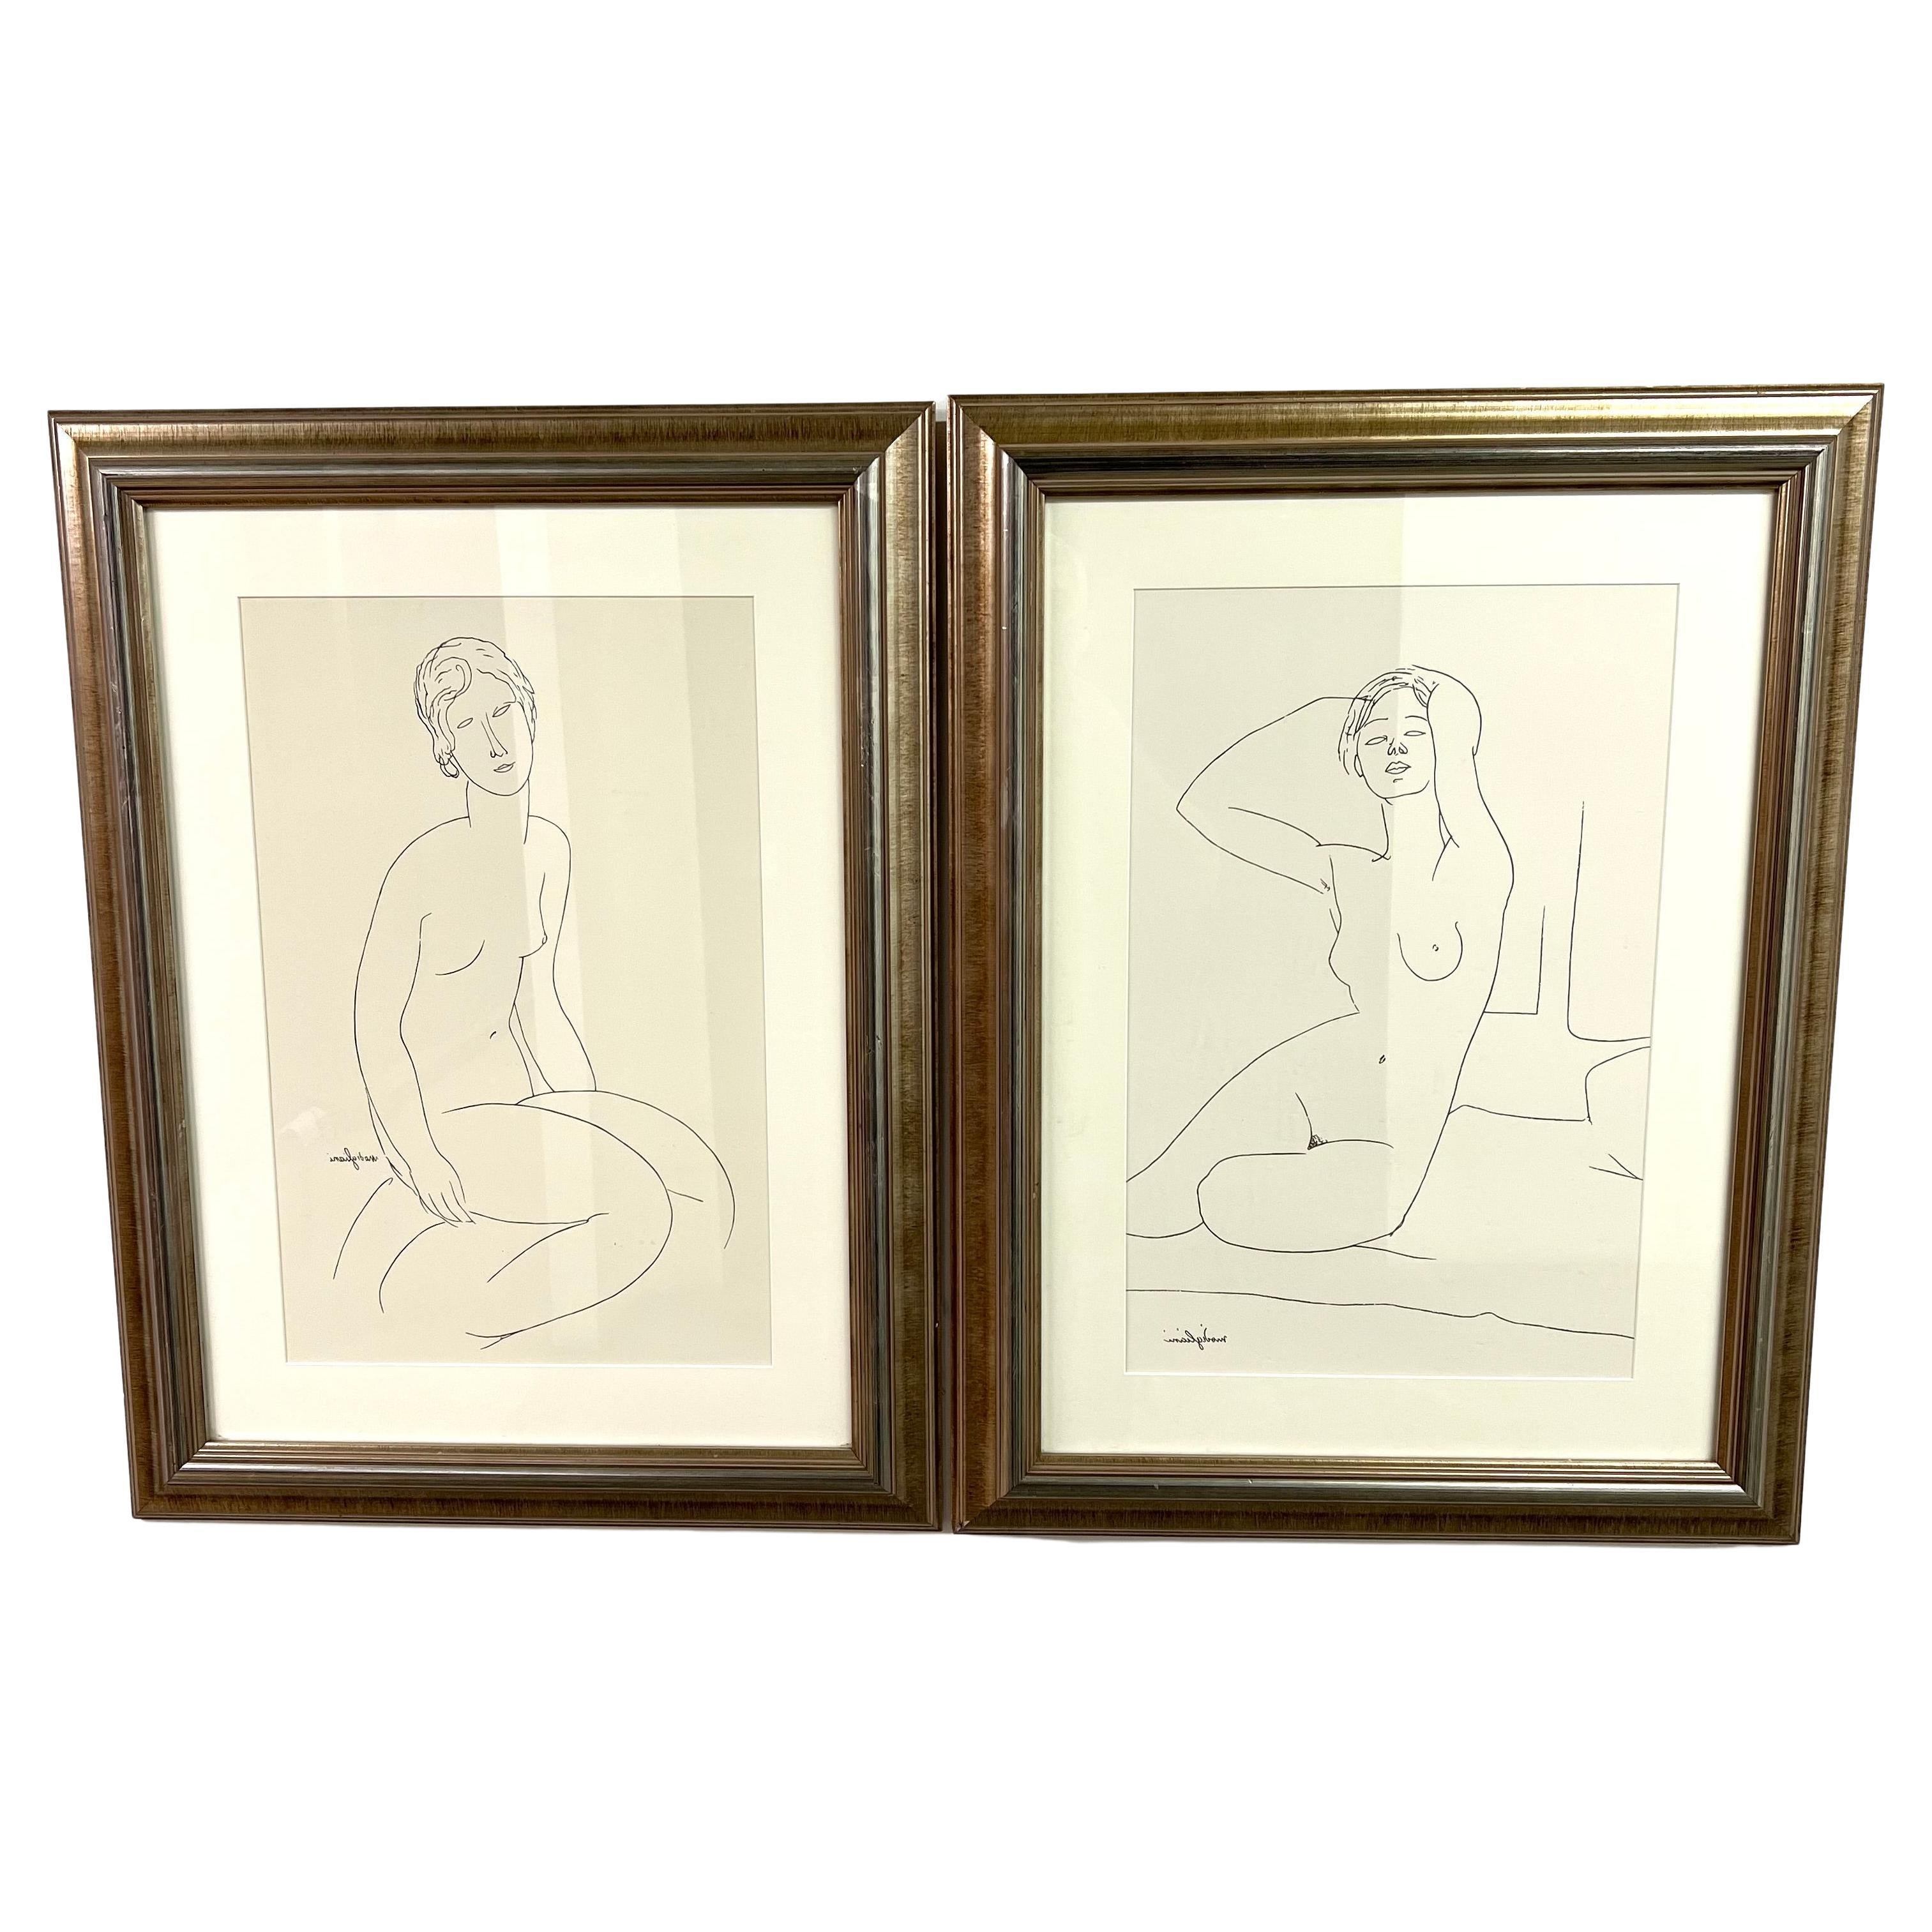 Pair of framed prints in the style of Italian artist Amedeo Modigliani. Gestural line drawings of two female figures are set in matching gold-colored frames and look great side-by-side. A wonderful accent to any wall. 
The pieces are lovely